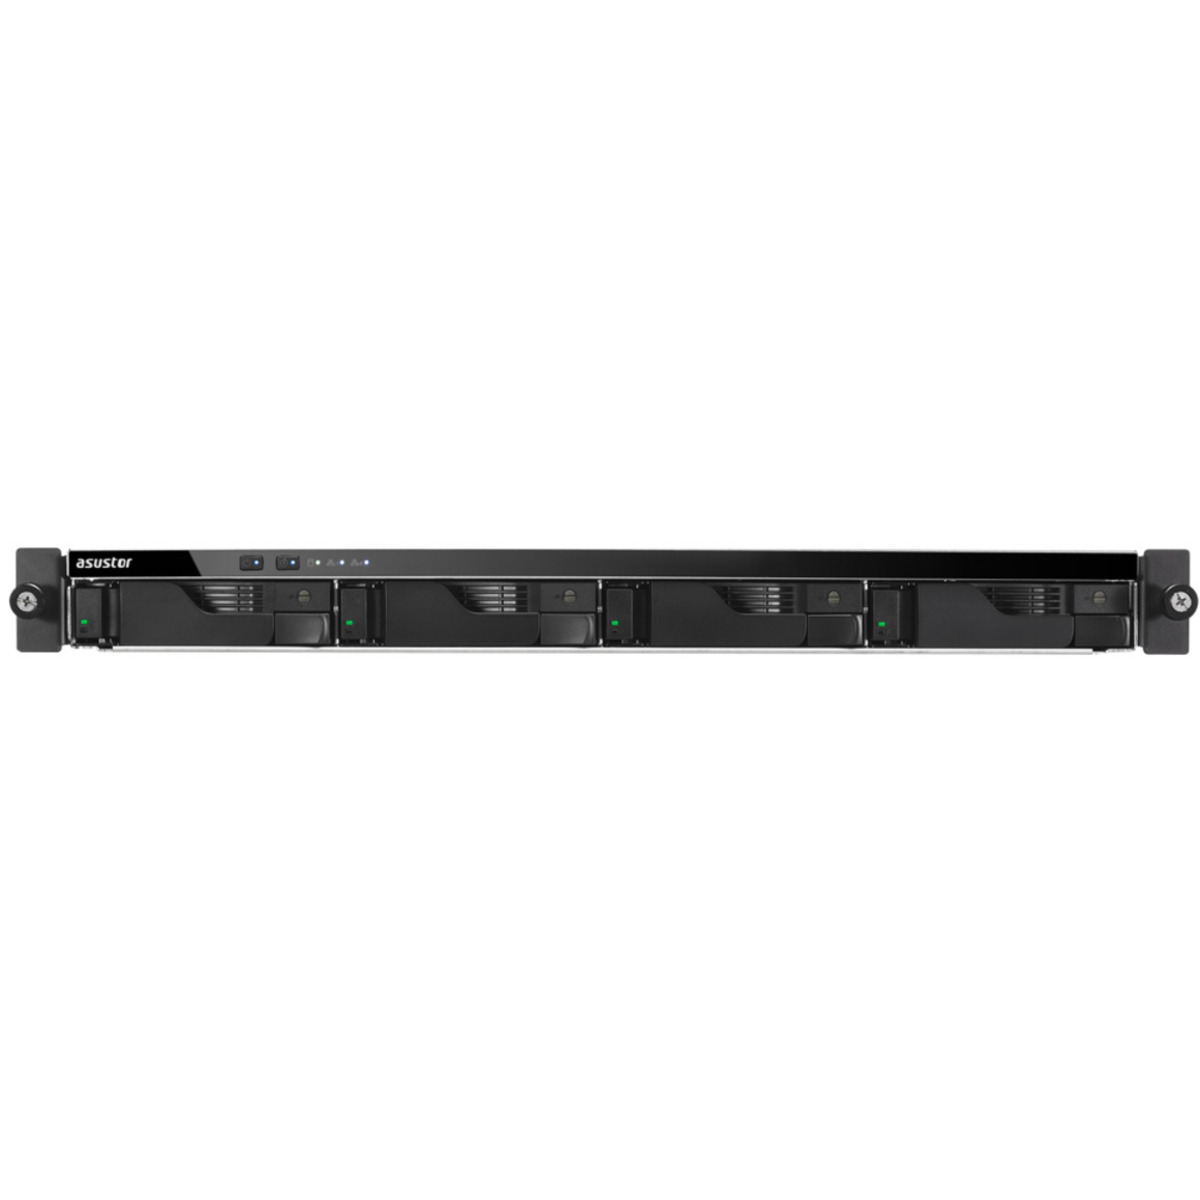 ASUSTOR LOCKERSTOR 4RD AS6504RD 8tb 4-Bay RackMount Multimedia / Power User / Business NAS - Network Attached Storage Device 2x4tb Seagate EXOS 7E10 ST4000NM024B 3.5 7200rpm SATA 6Gb/s HDD ENTERPRISE Class Drives Installed - Burn-In Tested - FREE RAM UPGRADE LOCKERSTOR 4RD AS6504RD